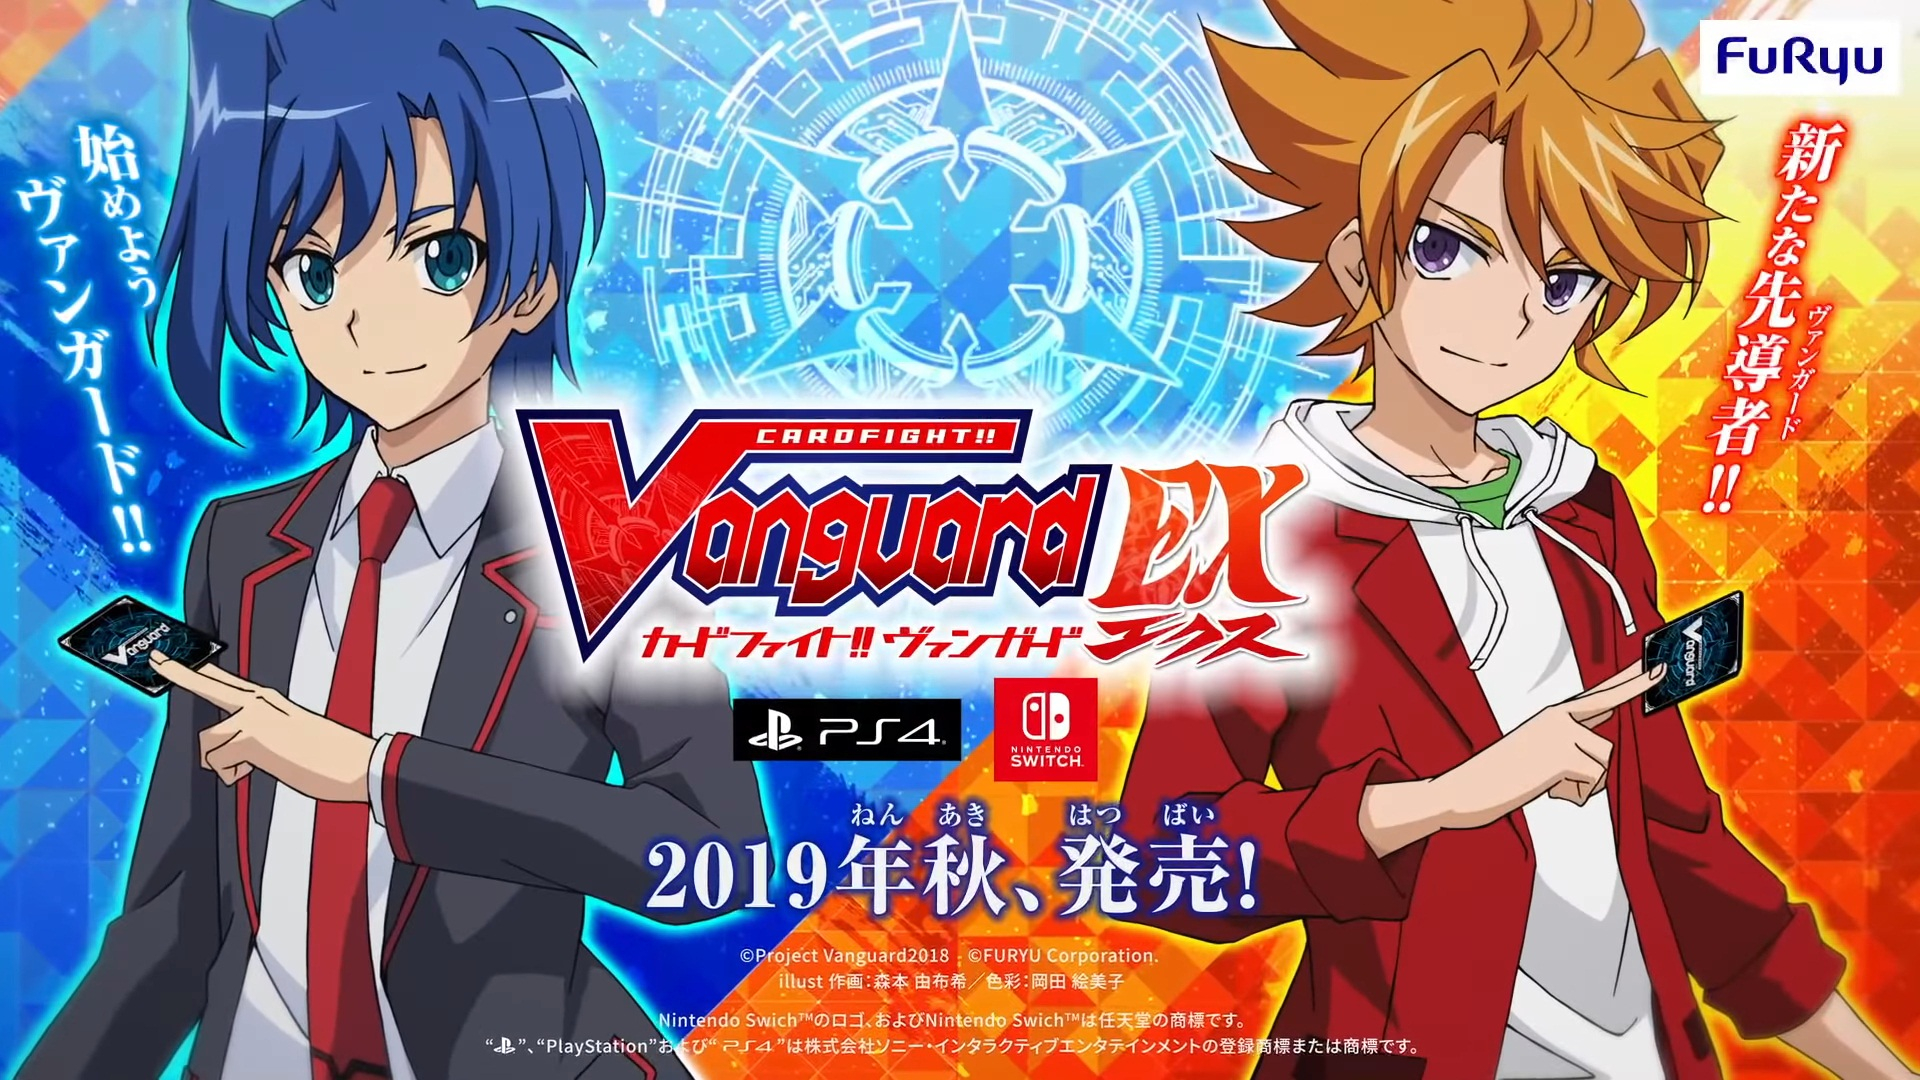 Cardfight Vanguard Ex Announced By Furyu For Ps Switch